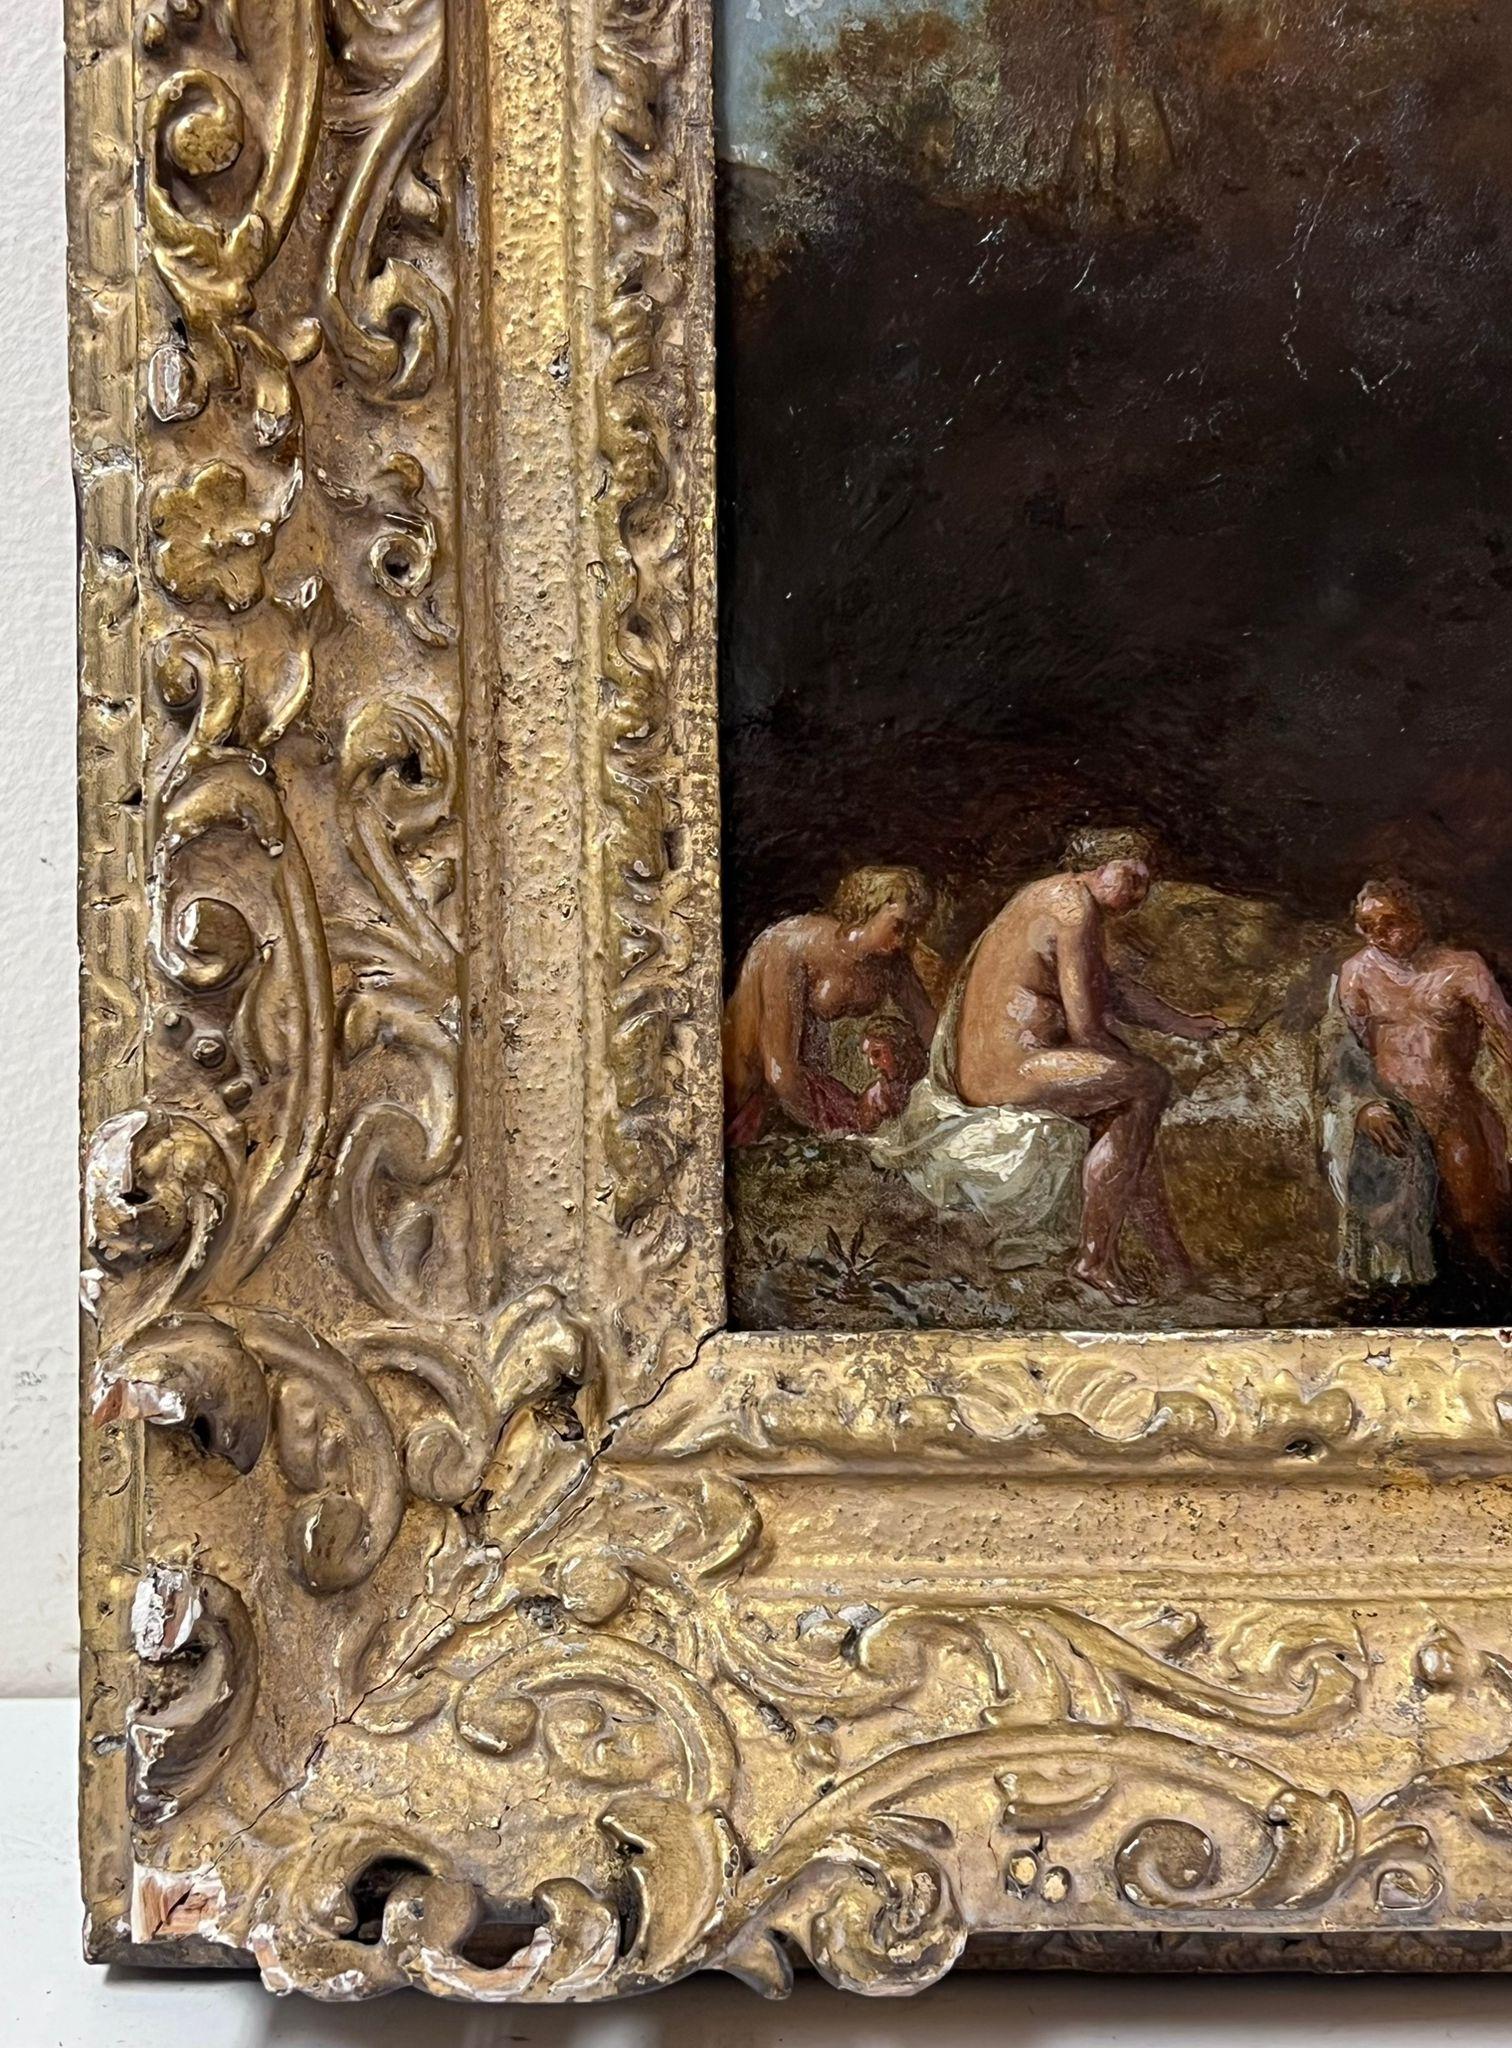 Fine 17th Century Dutch Old Master Oil Bathers by Wooden Pool Carved Wood Frame - Old Masters Painting by Cornelis van Poelenburgh